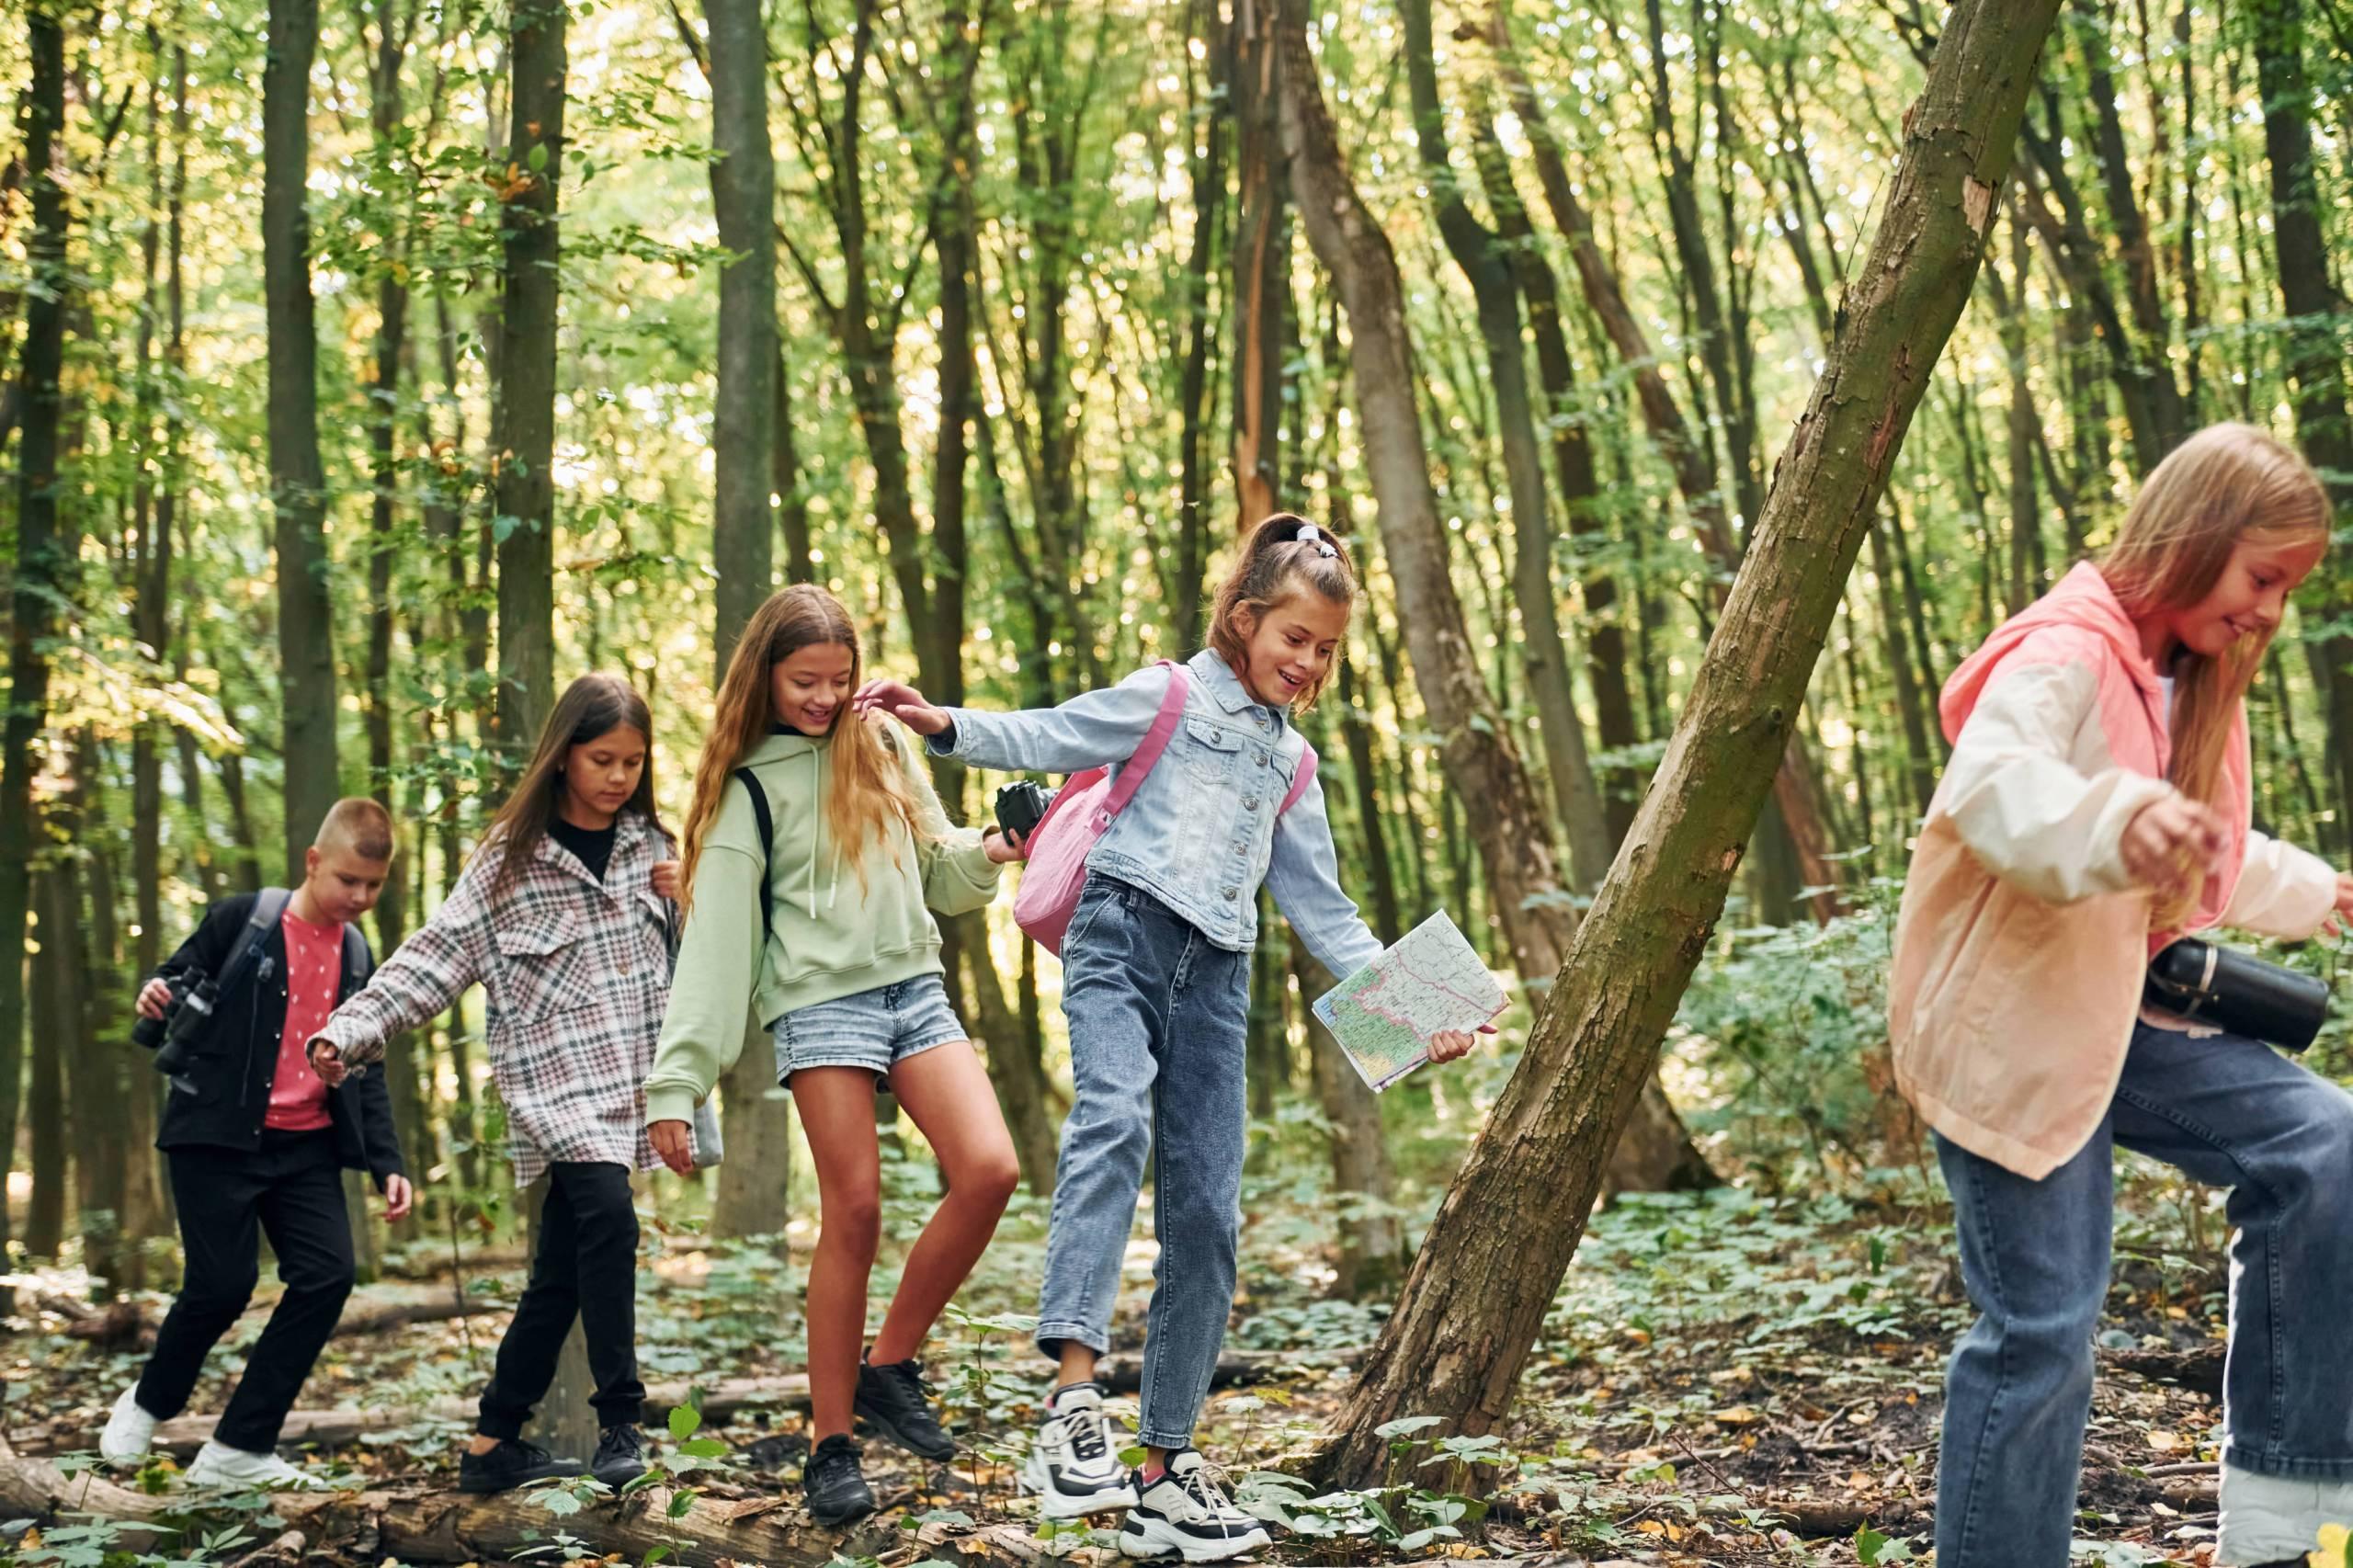 walking-on-the-log-kids-in-green-forest-at-summer-2021-12-23-00-56-48-utc